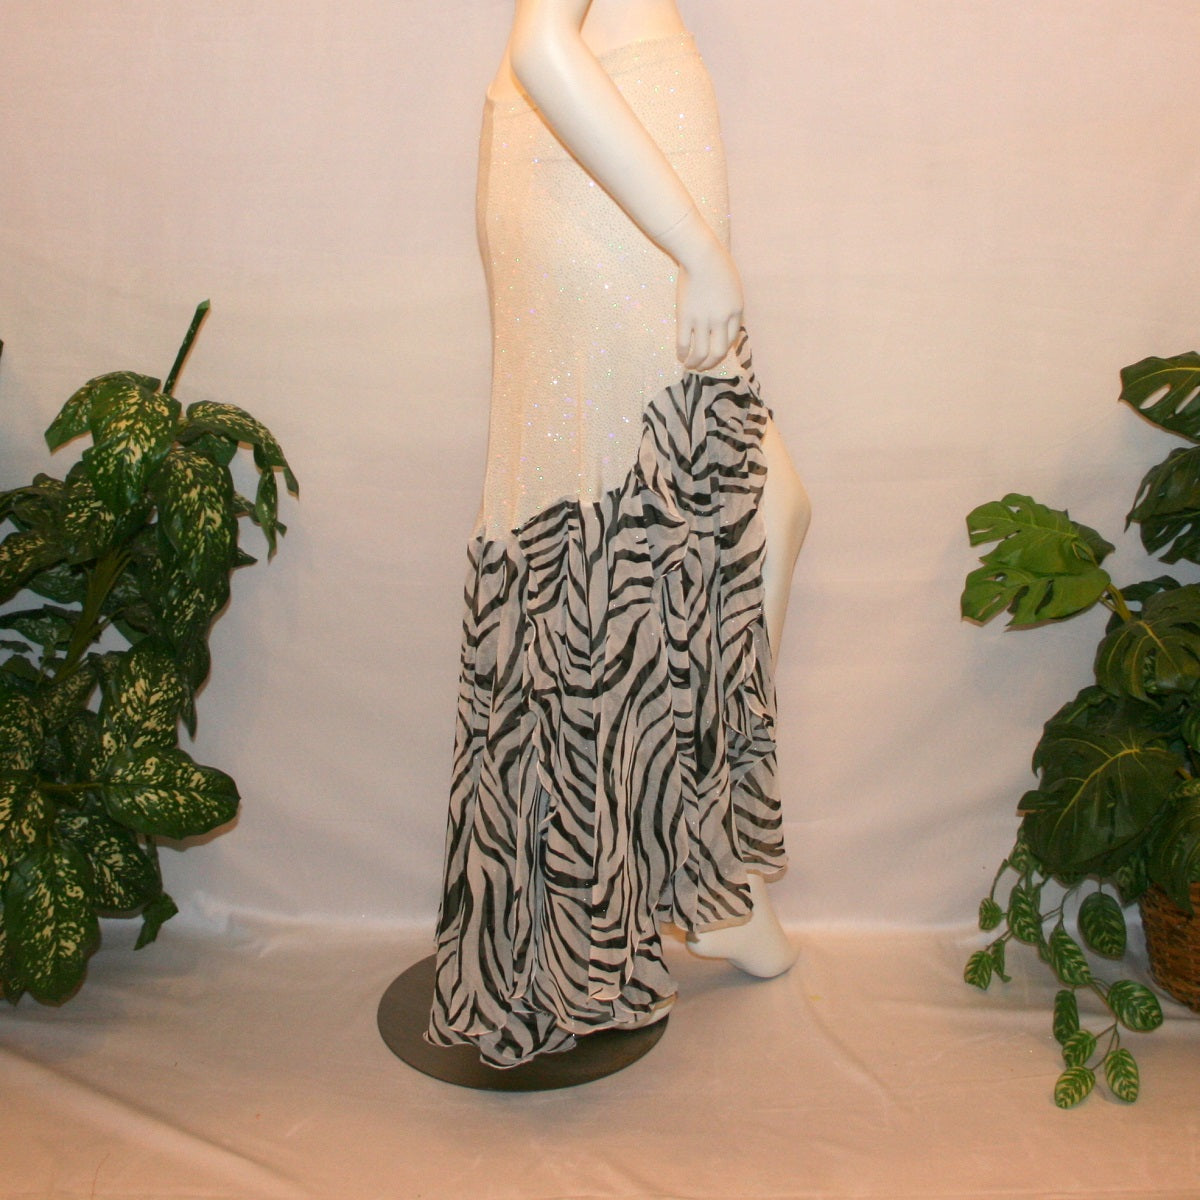 side view of Ballroom style skirt created of white glitter slinky with yards of zebra print flowing panels will work great to create a converta ballroom dress